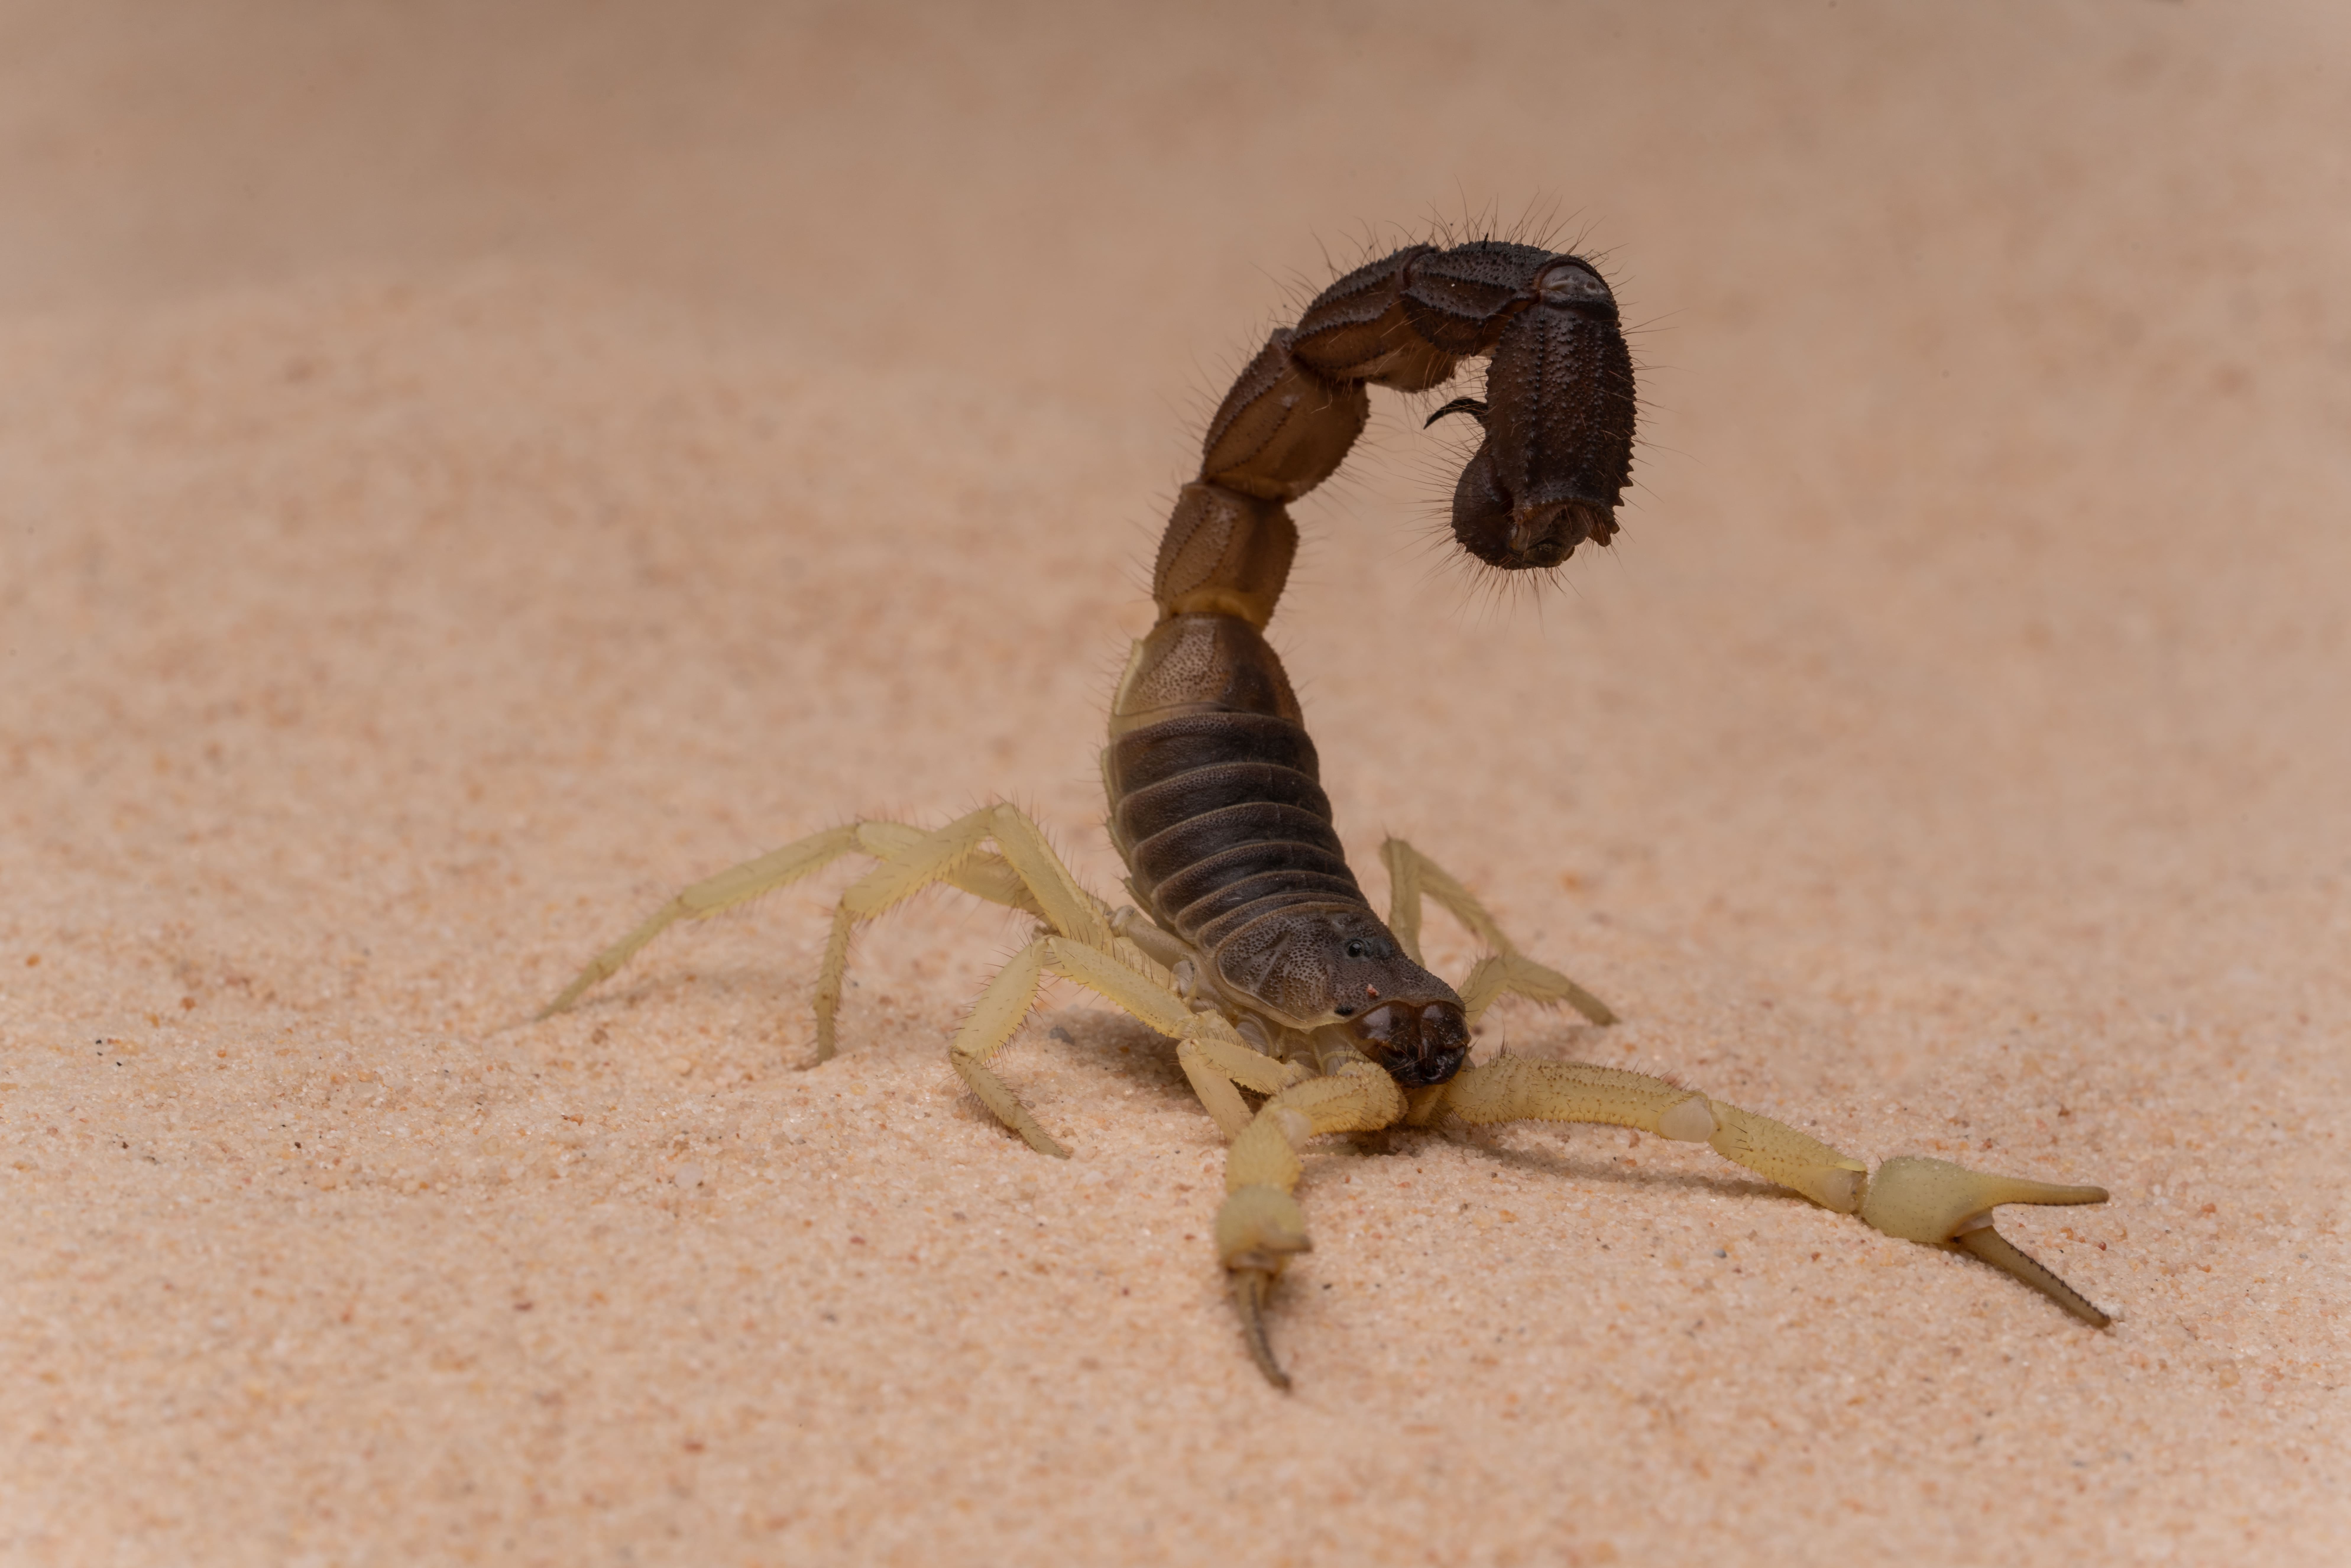 burrowing-thick-tail-scorpion-in-a-sandy-environme-min